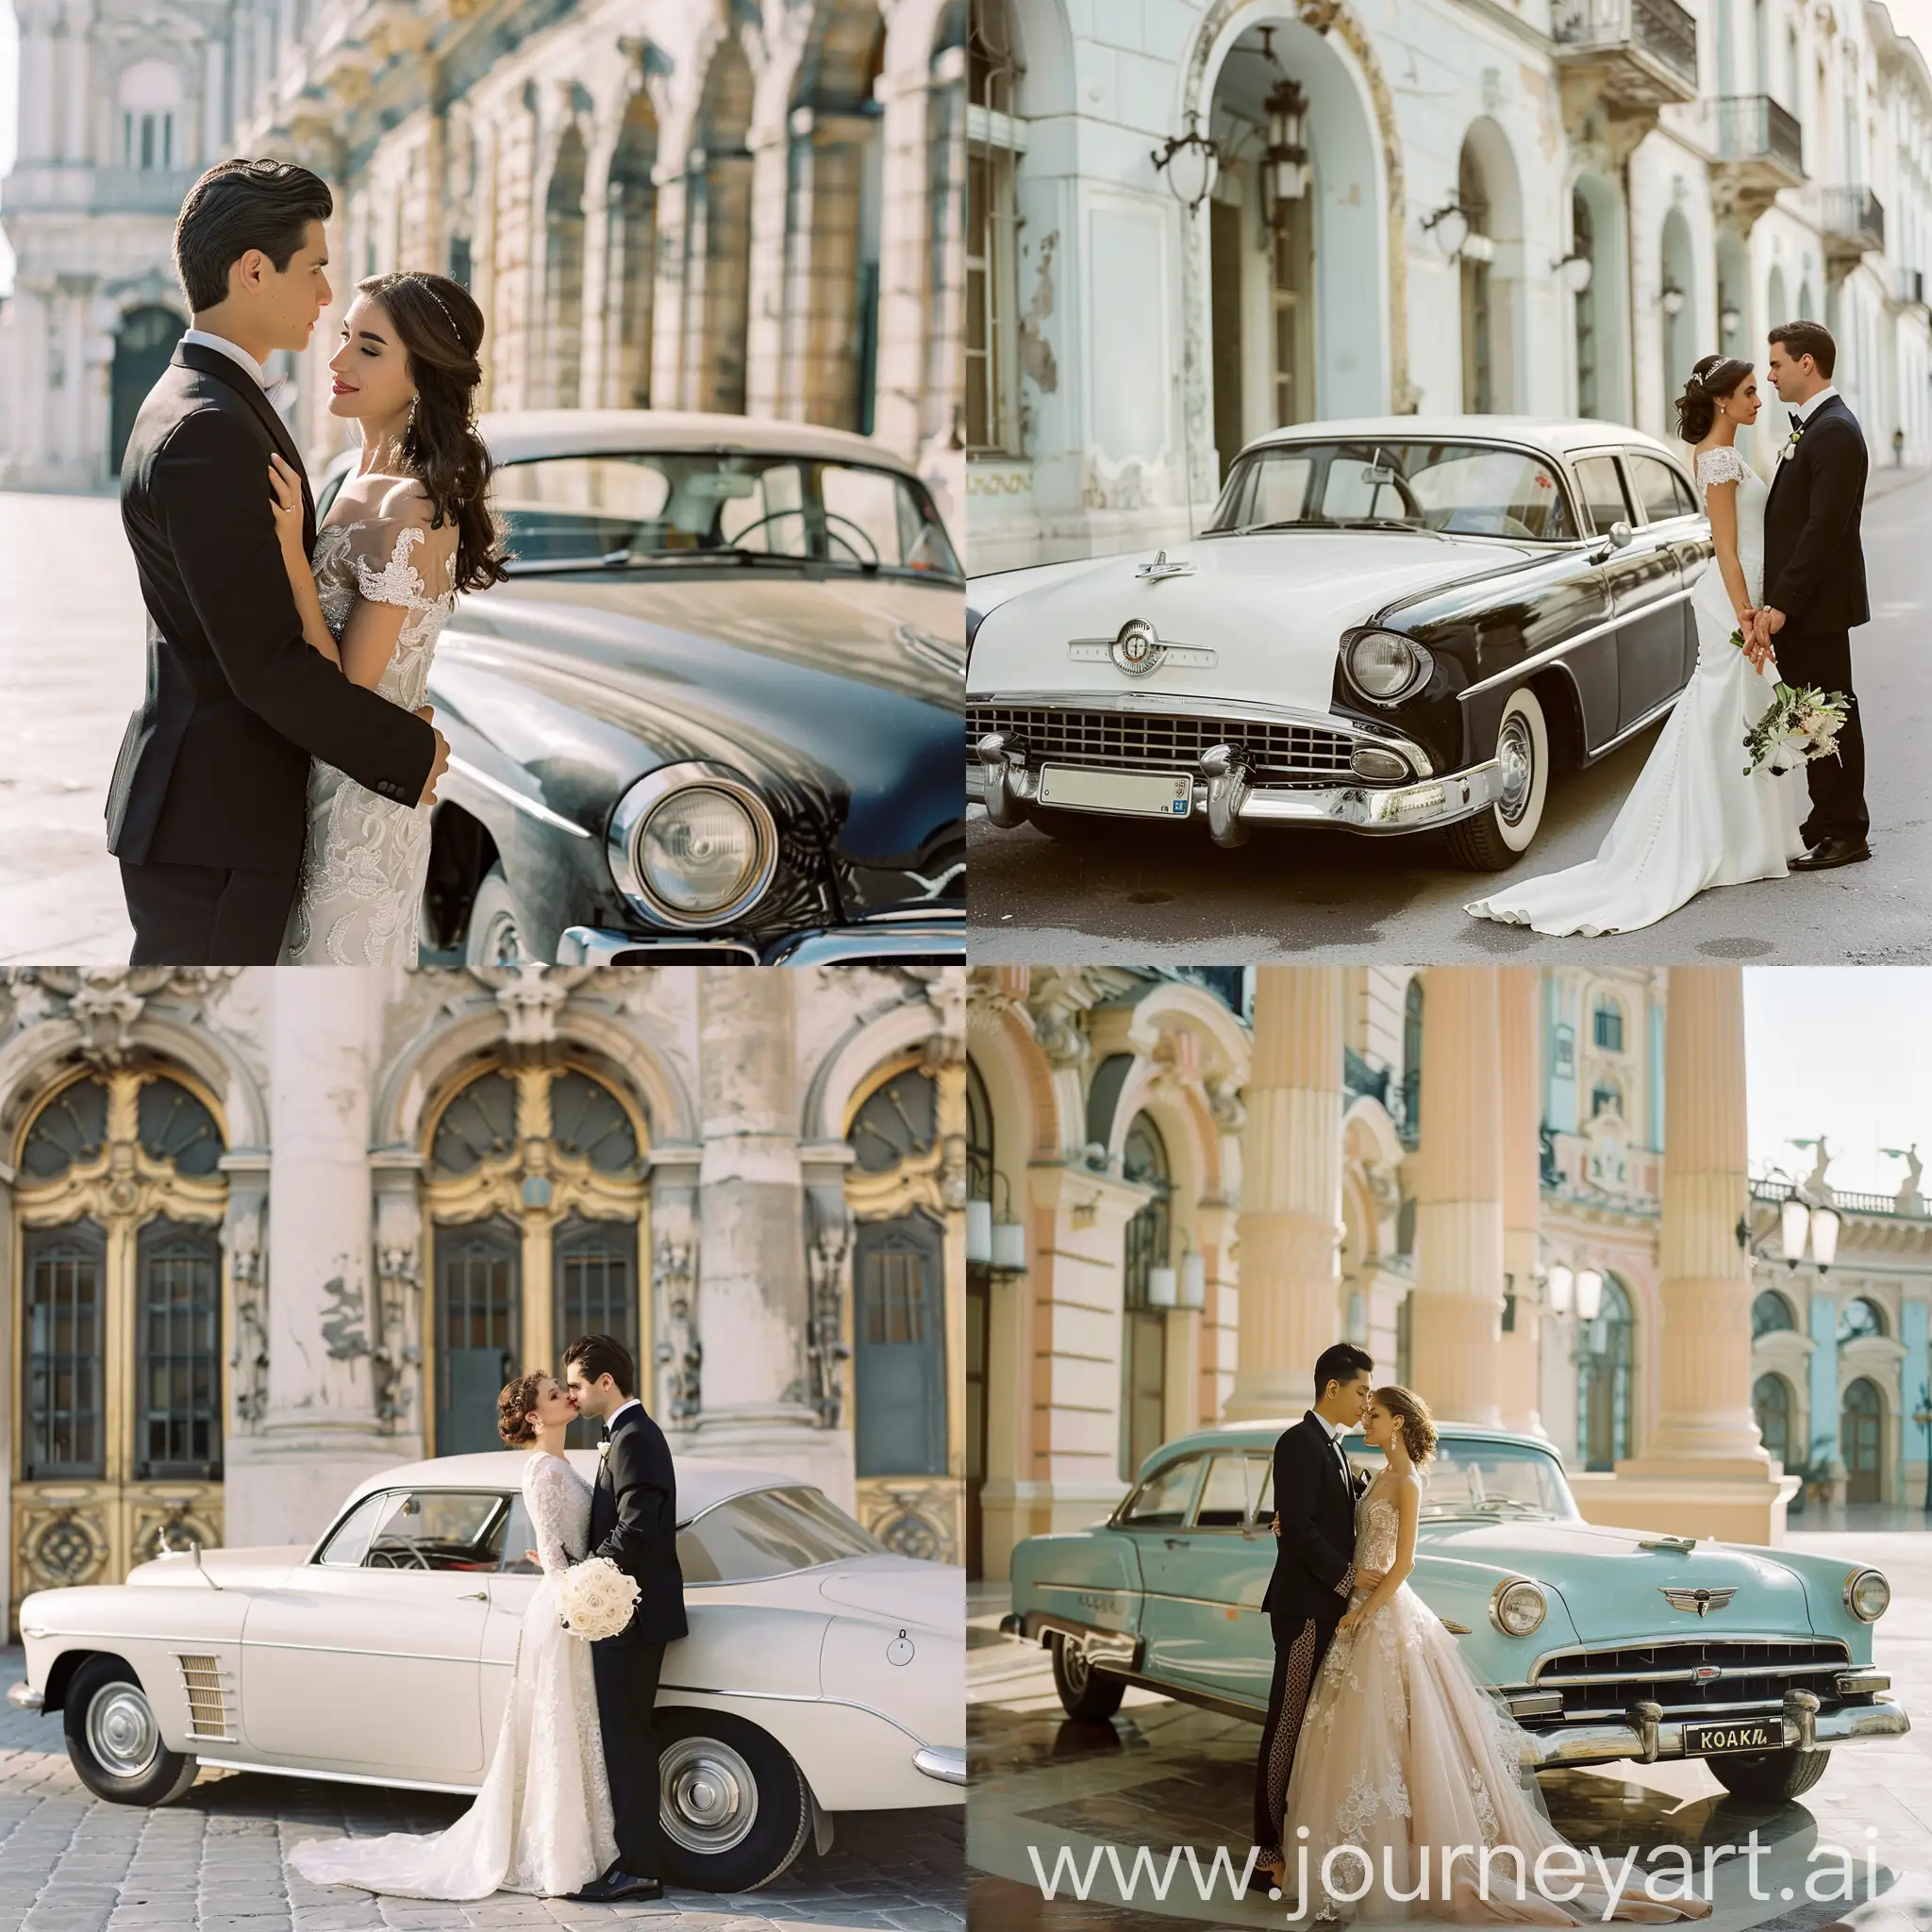 Editorial wedding photoshoot at classic building with classic car using kodak portra 400 with 35mm film